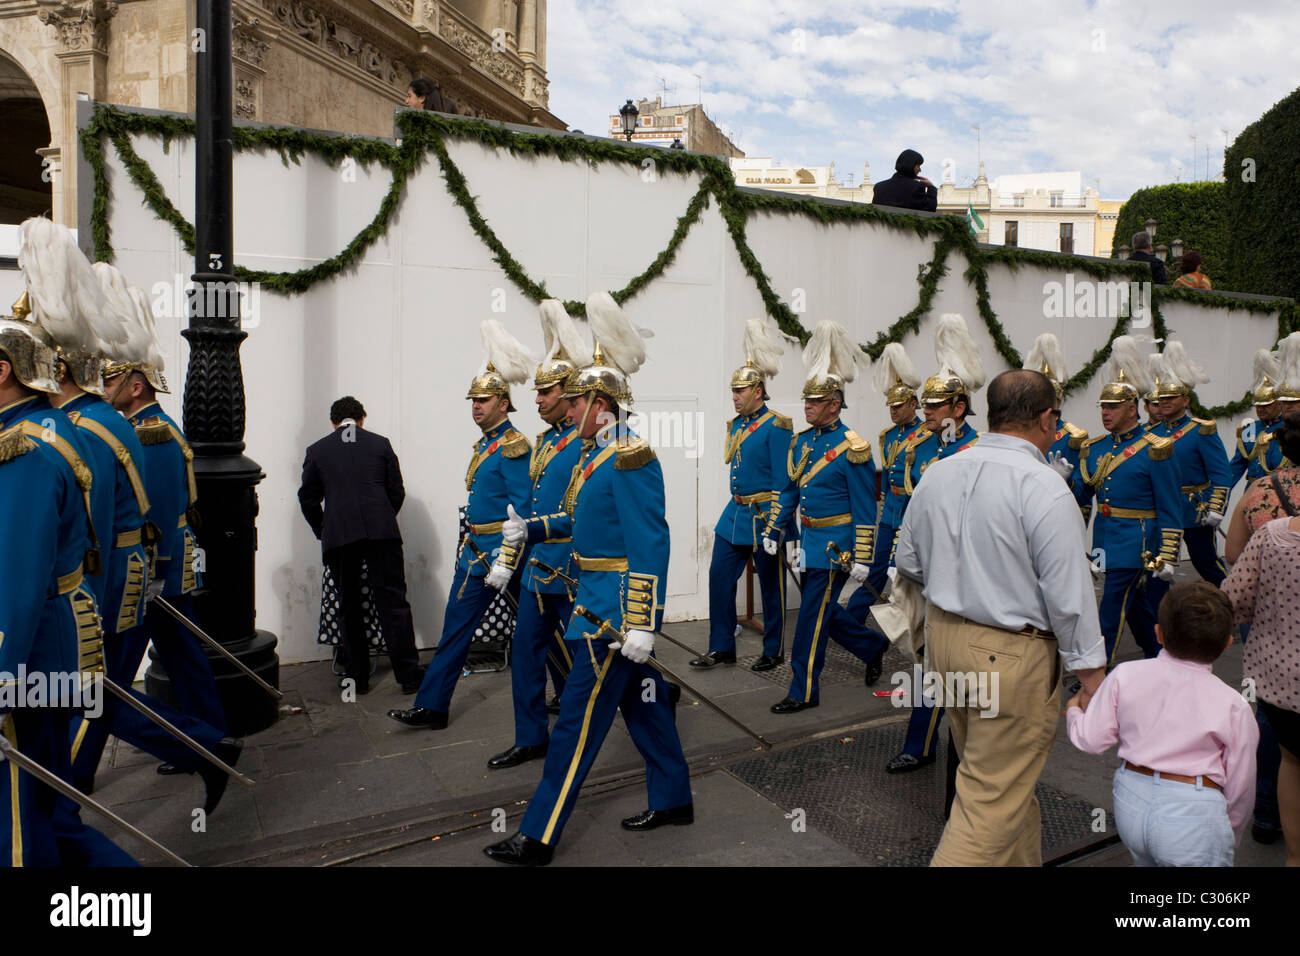 Uniformed musicians march through the city of Seville after religios Easter parades during Semana Santa. Stock Photo